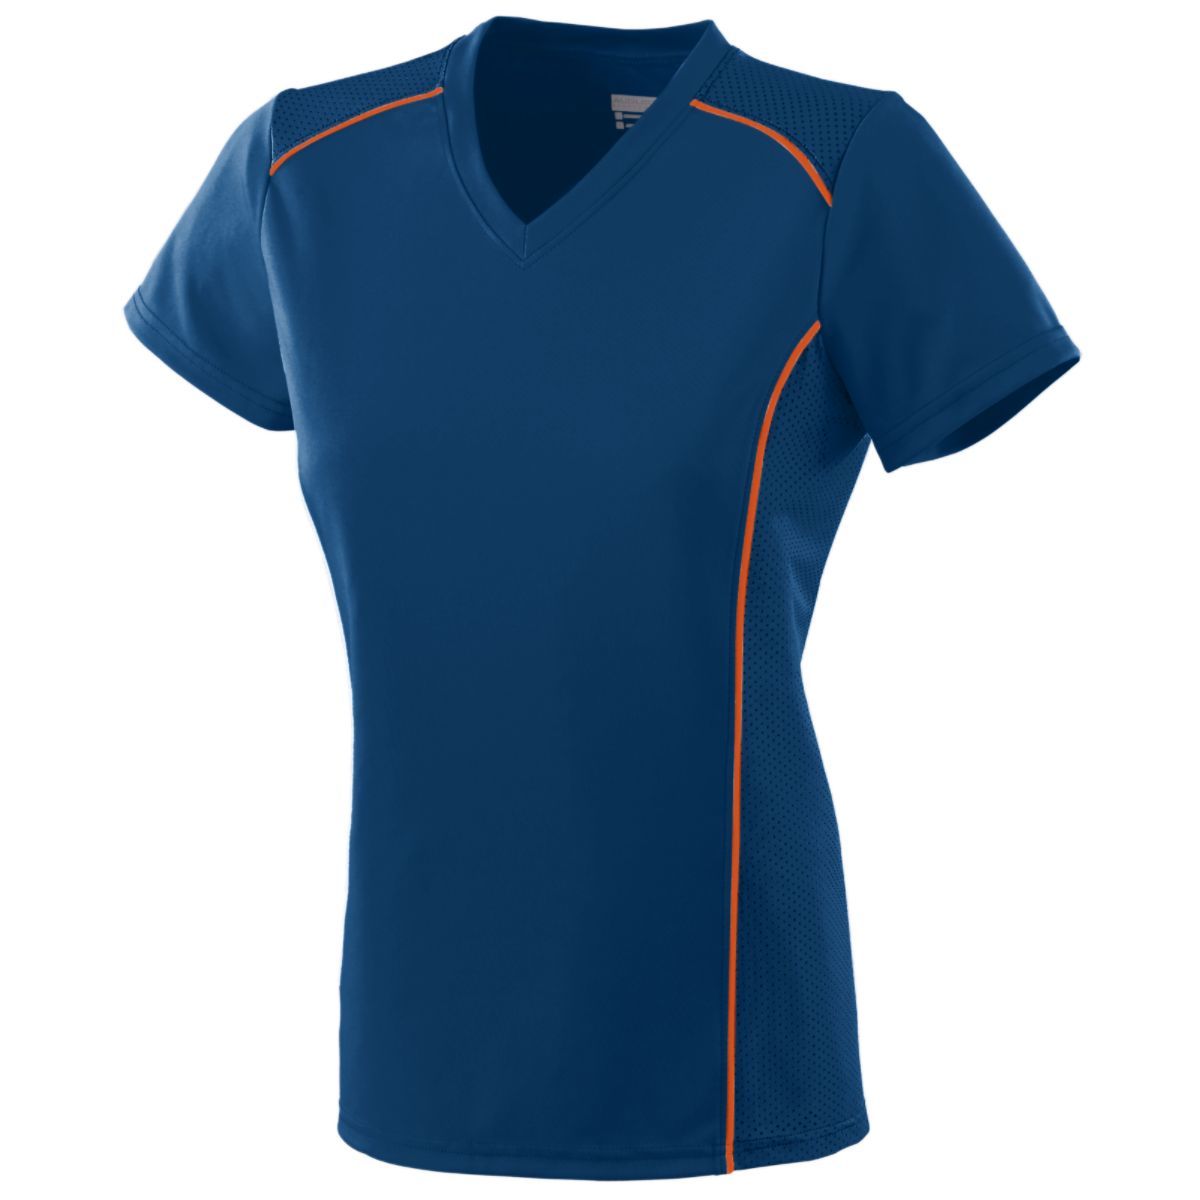 Augusta Sportswear Girls Winning Streak Jersey in Navy/Orange  -Part of the Girls, Augusta-Products, Soccer, Girls-Jersey, Shirts, All-Sports-1 product lines at KanaleyCreations.com